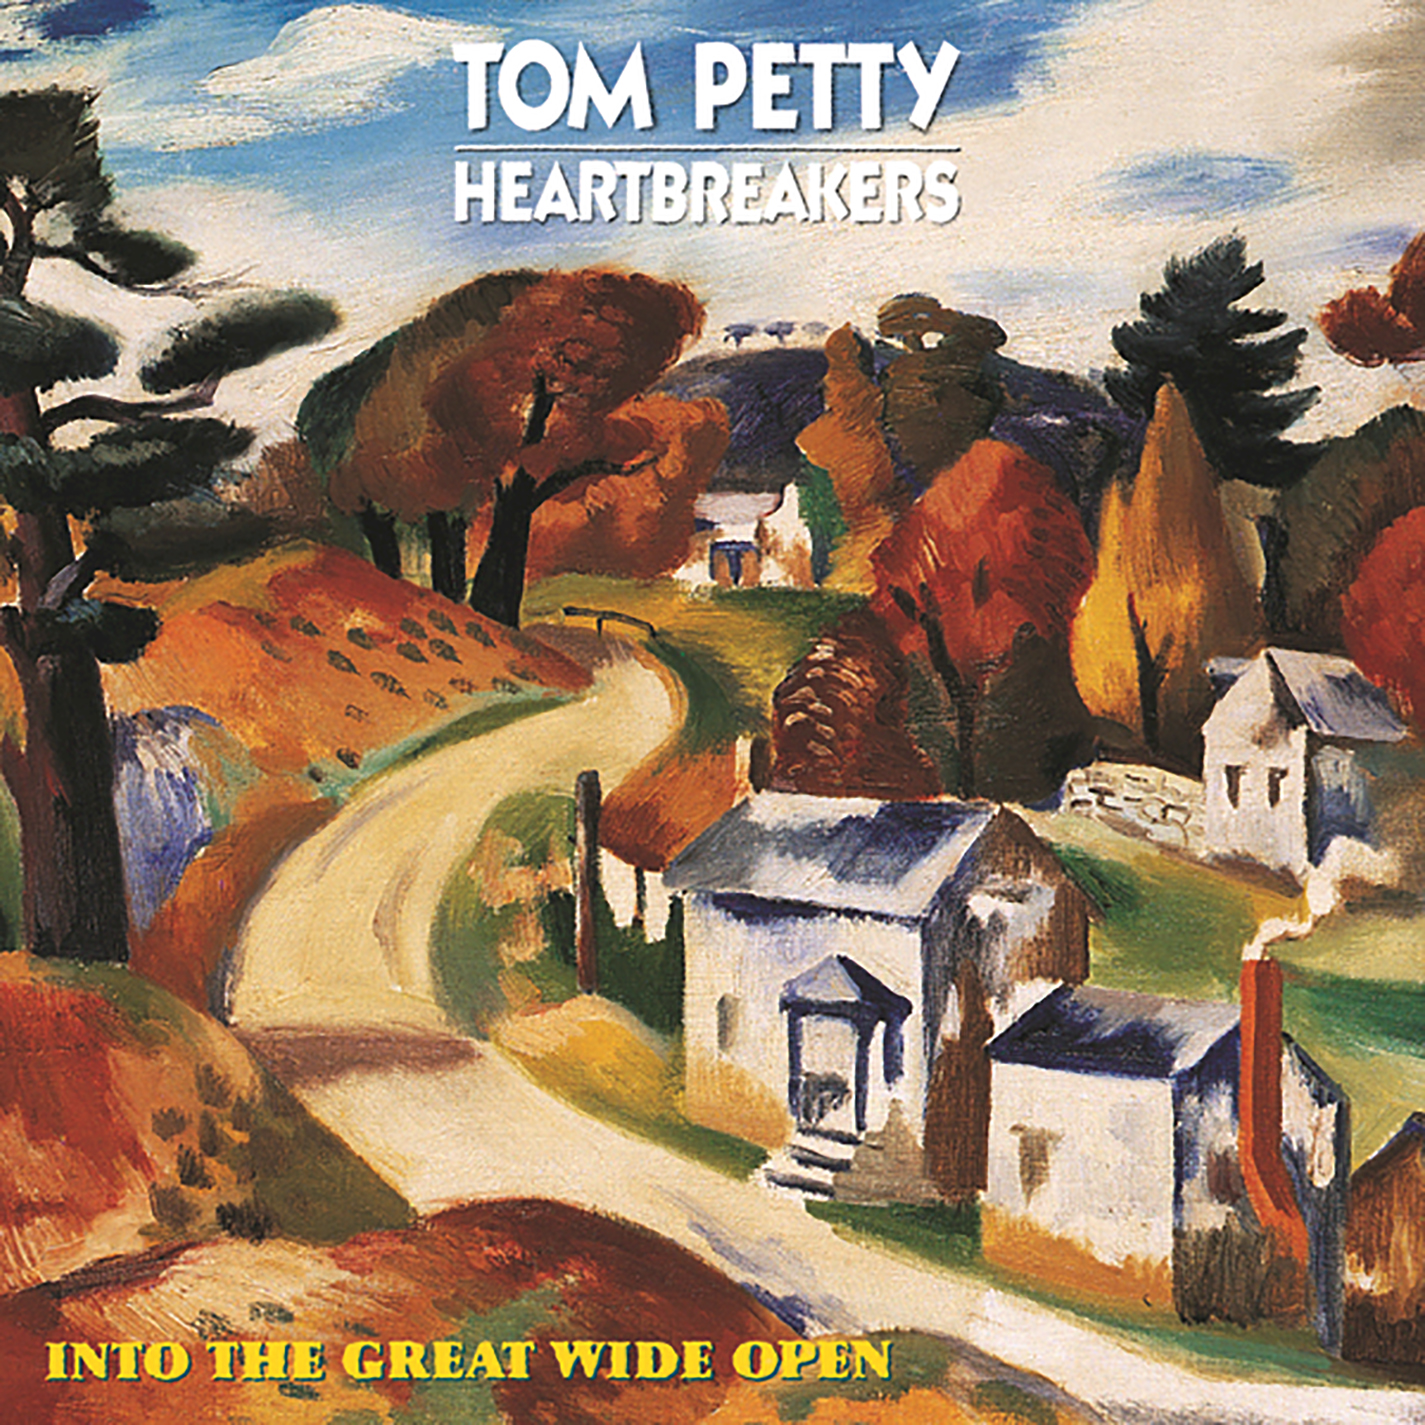 Tom Petty & The Heartbreakers - 1991 - Into The Great Wide Open [2015] 24-96